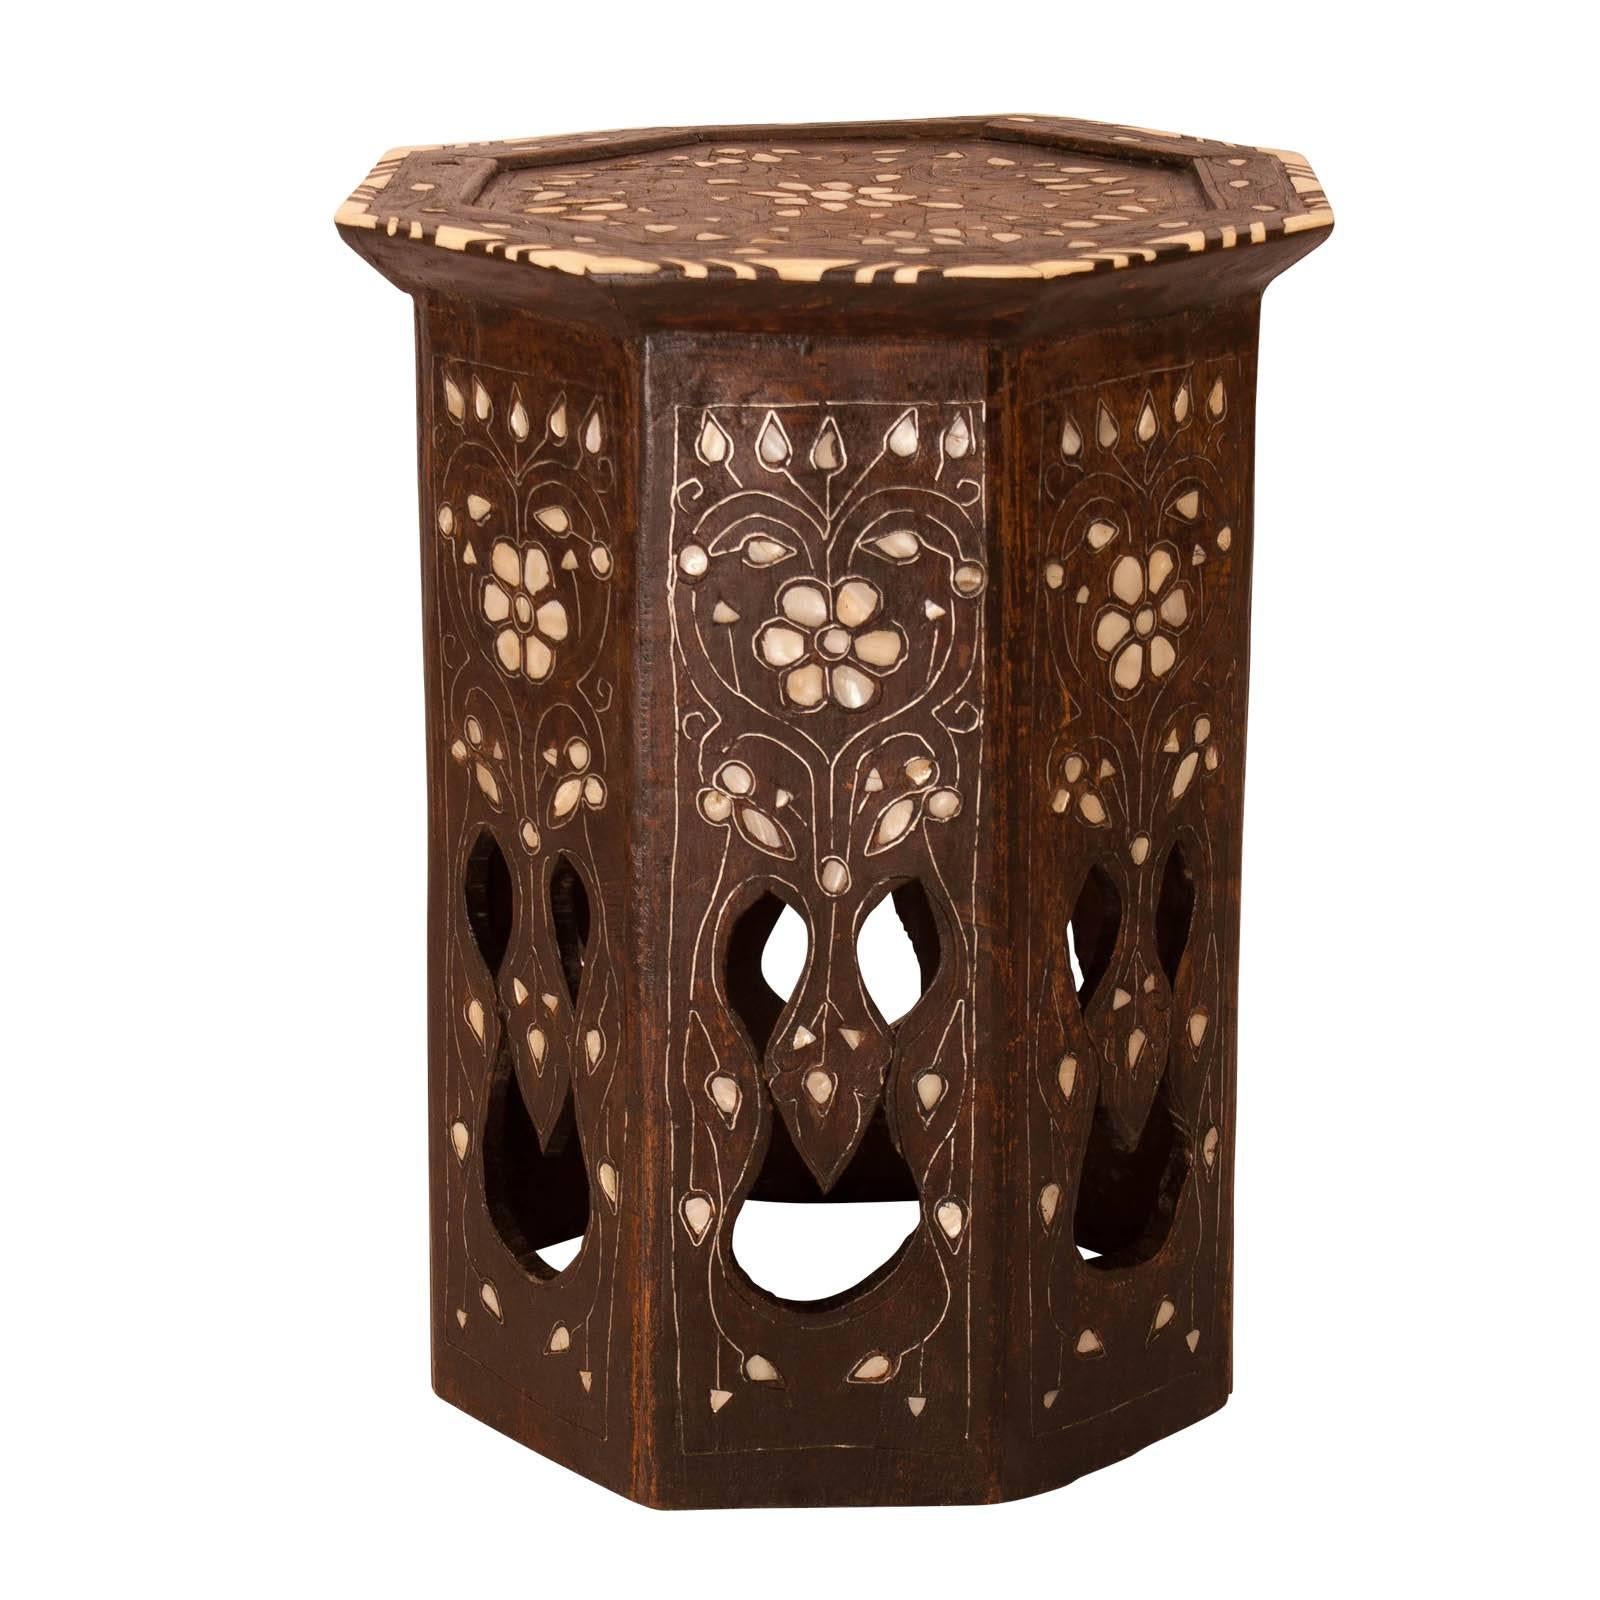 Moroccan octagonal inlaid table, circa 1900. Classic side table for any room that you are looking to add an unexpected touch.